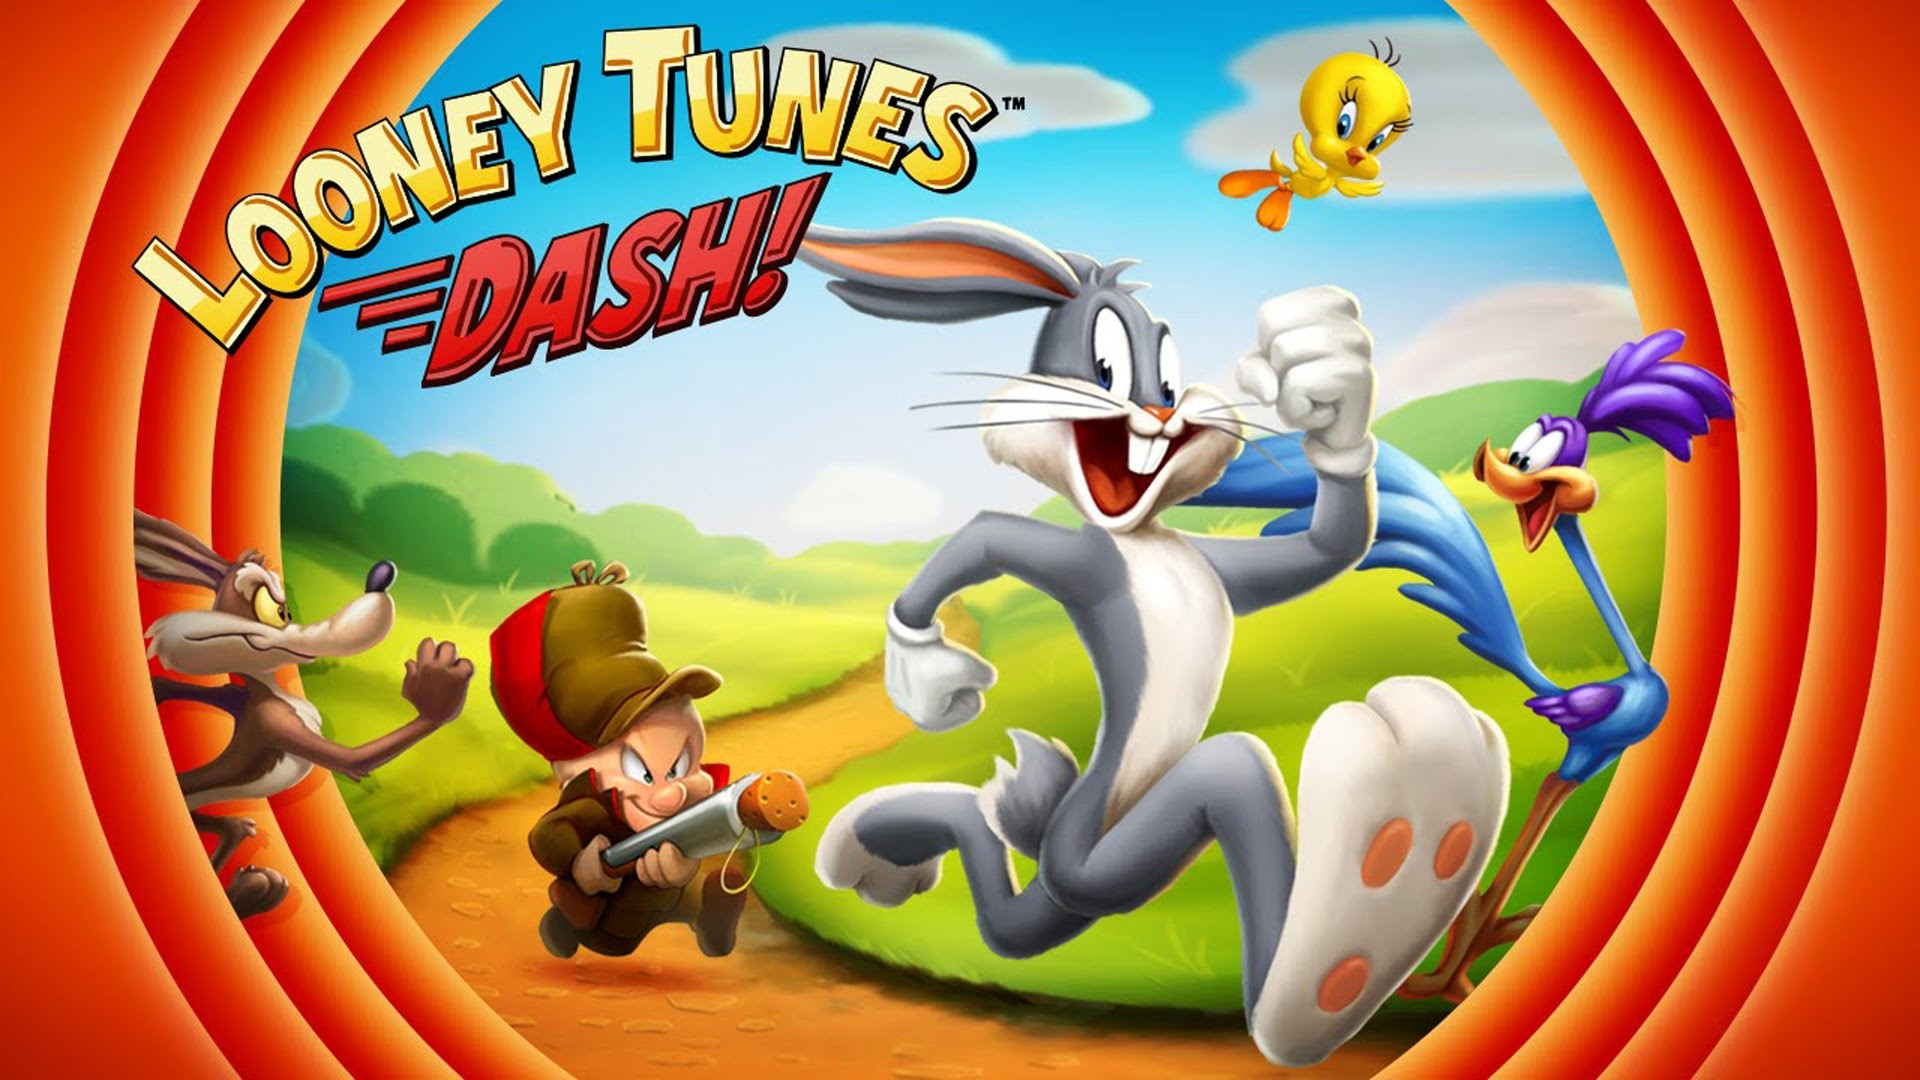 1920x1080 Cool Looney tunes wallpaper background